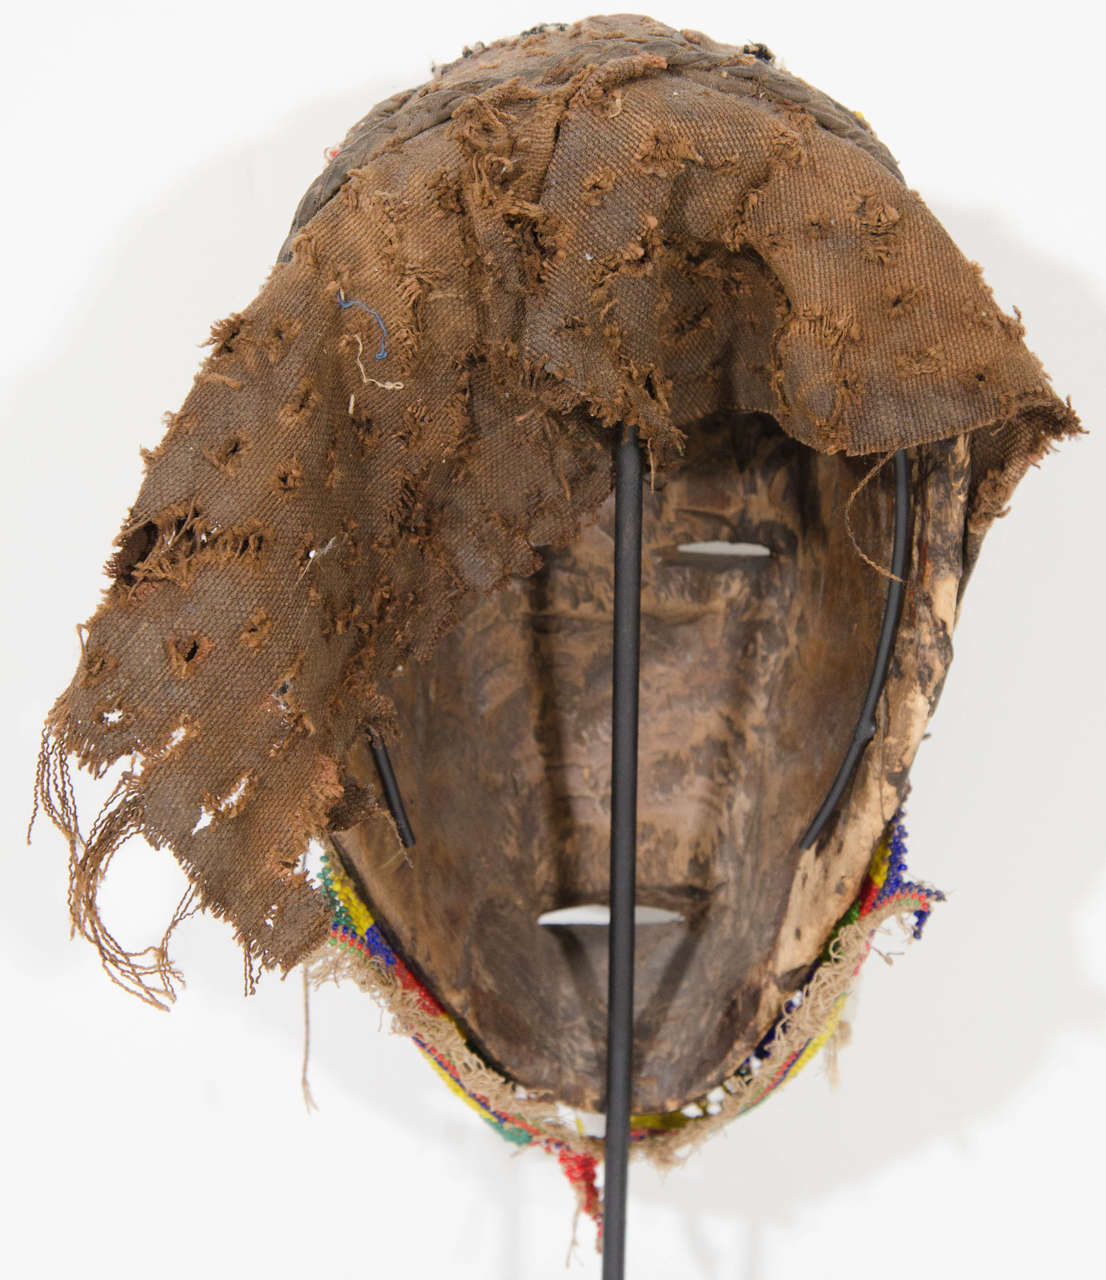 Beaded Wooden Mask in the Style of Chokwe Tribal Ritual 3